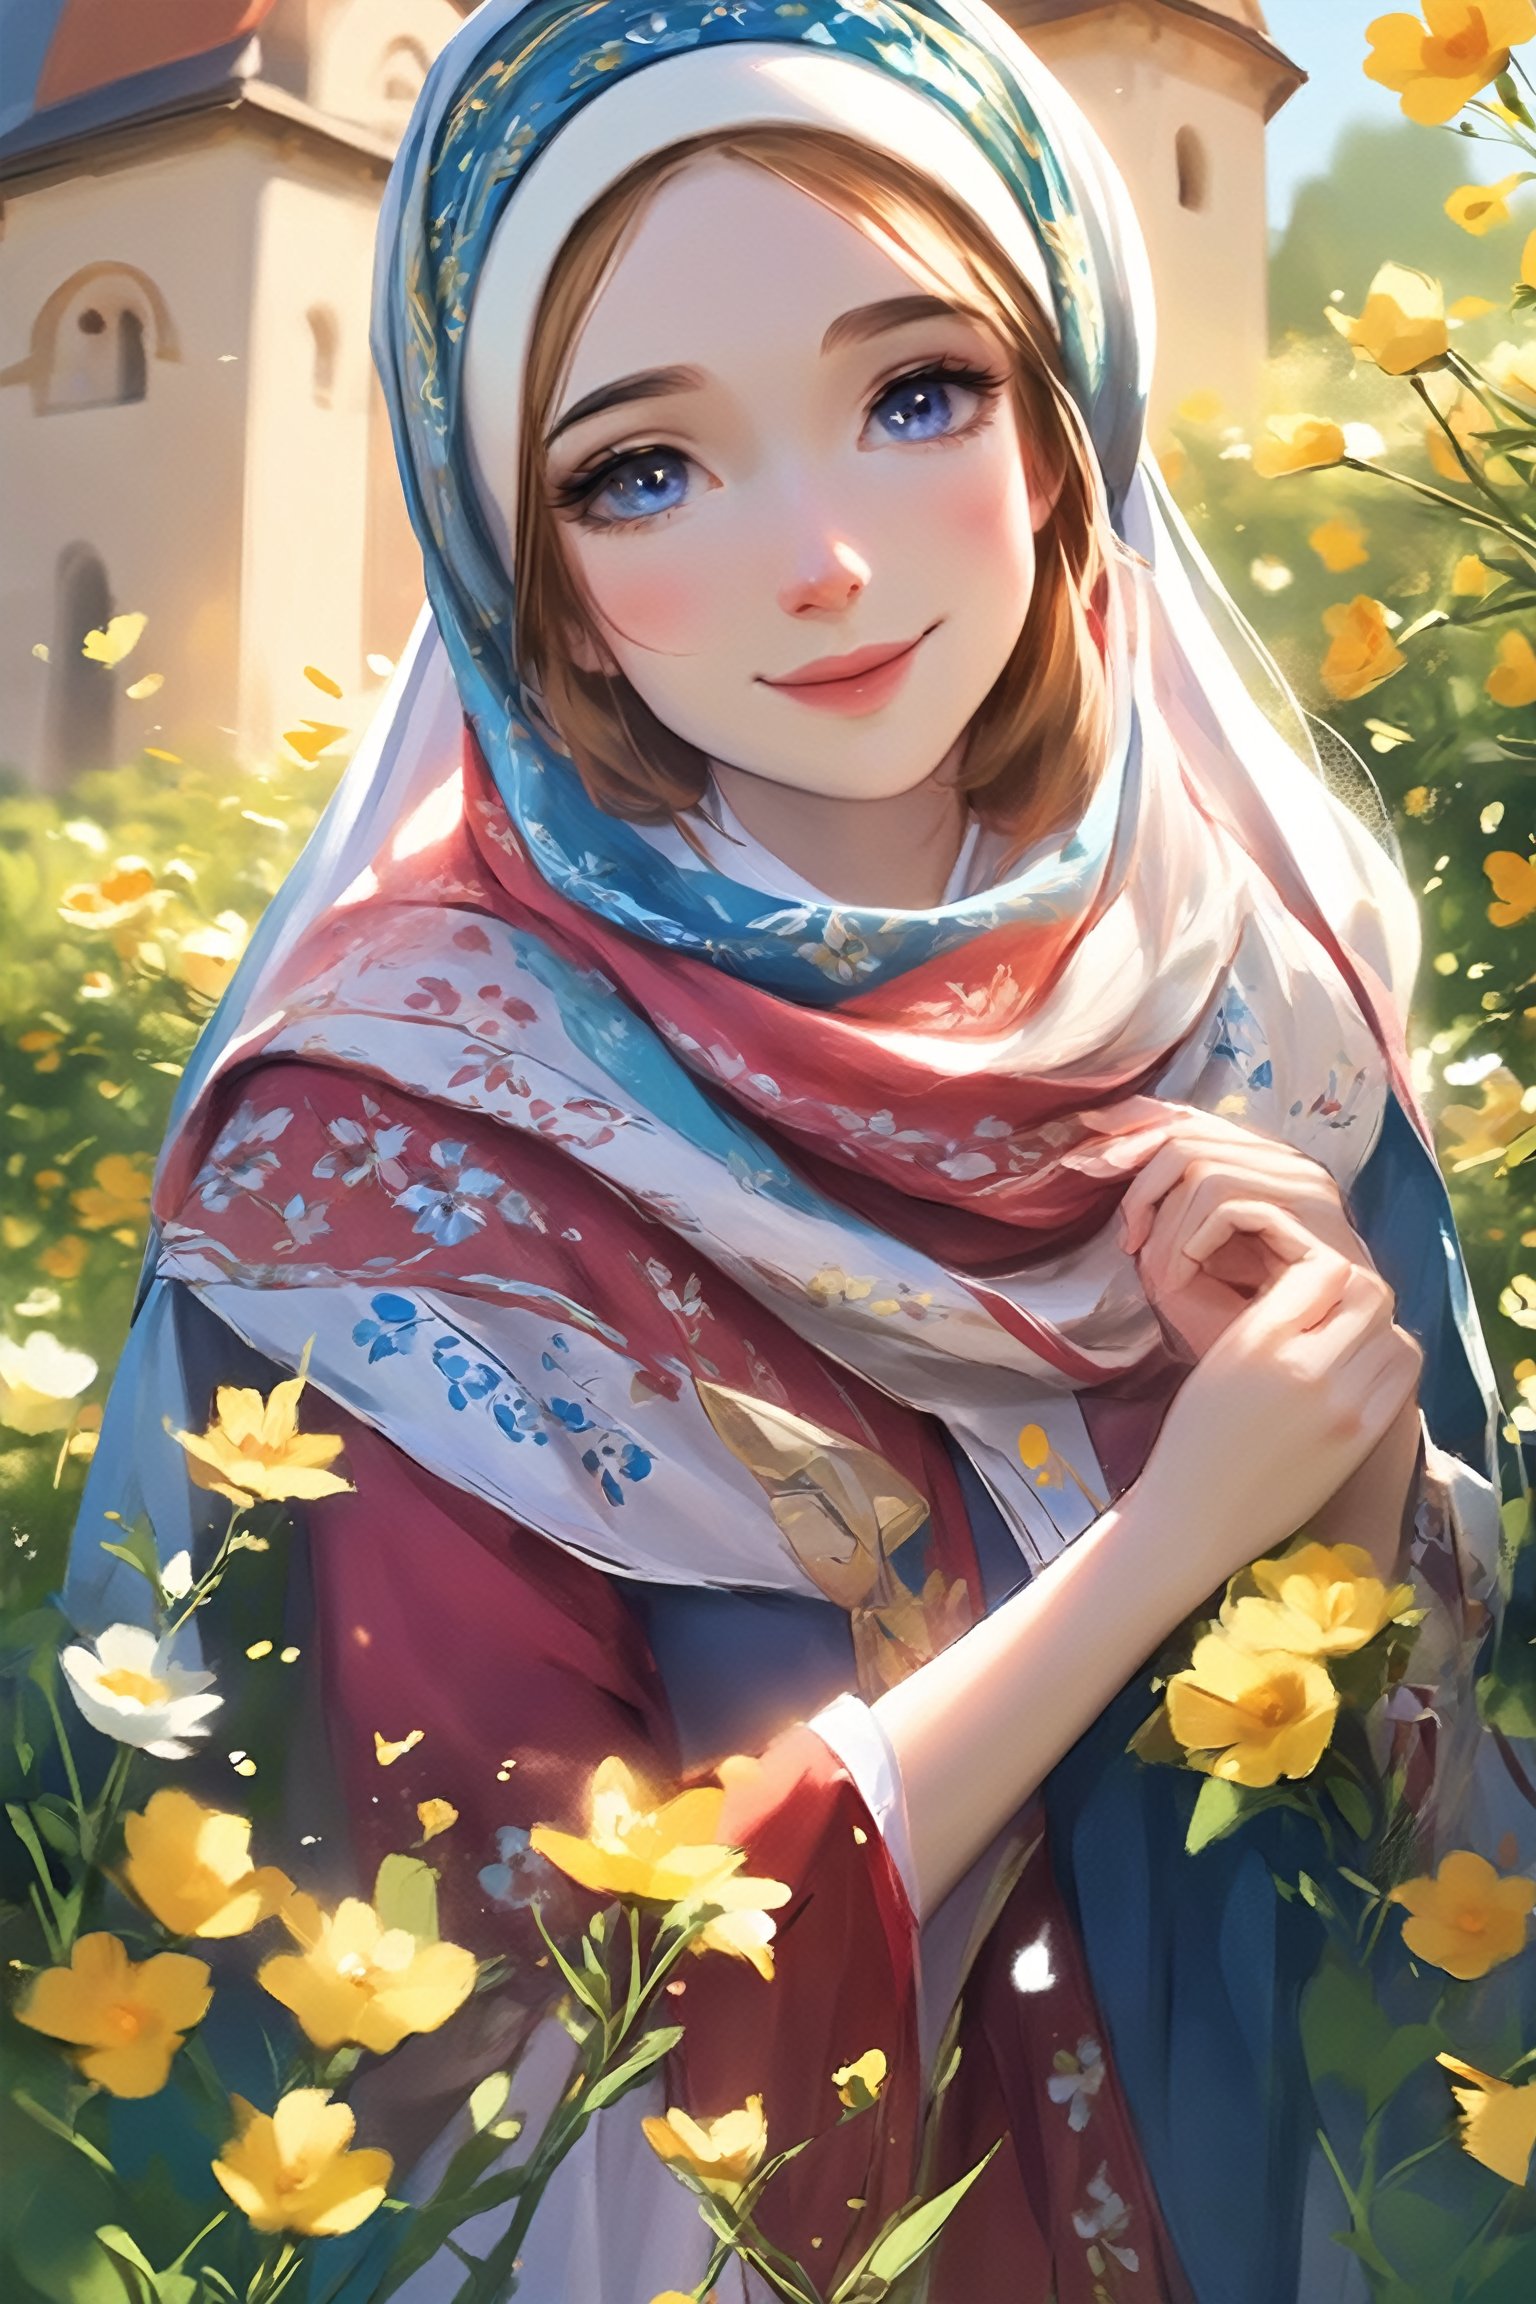 (1girl), a girl in an Orthodox church wears a modest scarf on her head, a long floor-length skirt with a pattern, beautiful girl smiles, beautiful eyes, high detail, clear face, light falls on her face, wildflowers, sunny day, voluminous lighting, soft morning light, sunlight glinting on her skin, Russian beauty (in color, color illustration), ((full body), low-key, sharp focus on subject, intricate environment scenery:1.1), (masterpiece, detailed, highres:1.4), (perfect feminine anatomy, perfect proportions, Perfect Hands:1.125), Sweeping cinematic lens flares, ultra crisp details, (f_stop 2.8), (focal_length 85mm f/2.8), K-Eyes, Perfect Hands, Wonder of Beauty, K-Eyes,Long Legs and Hot Body,<lora:EMS-248183-EMS:0.700000>,<lora:EMS-304982-EMS:0.800000>,<lora:EMS-231841-EMS:0.800000>